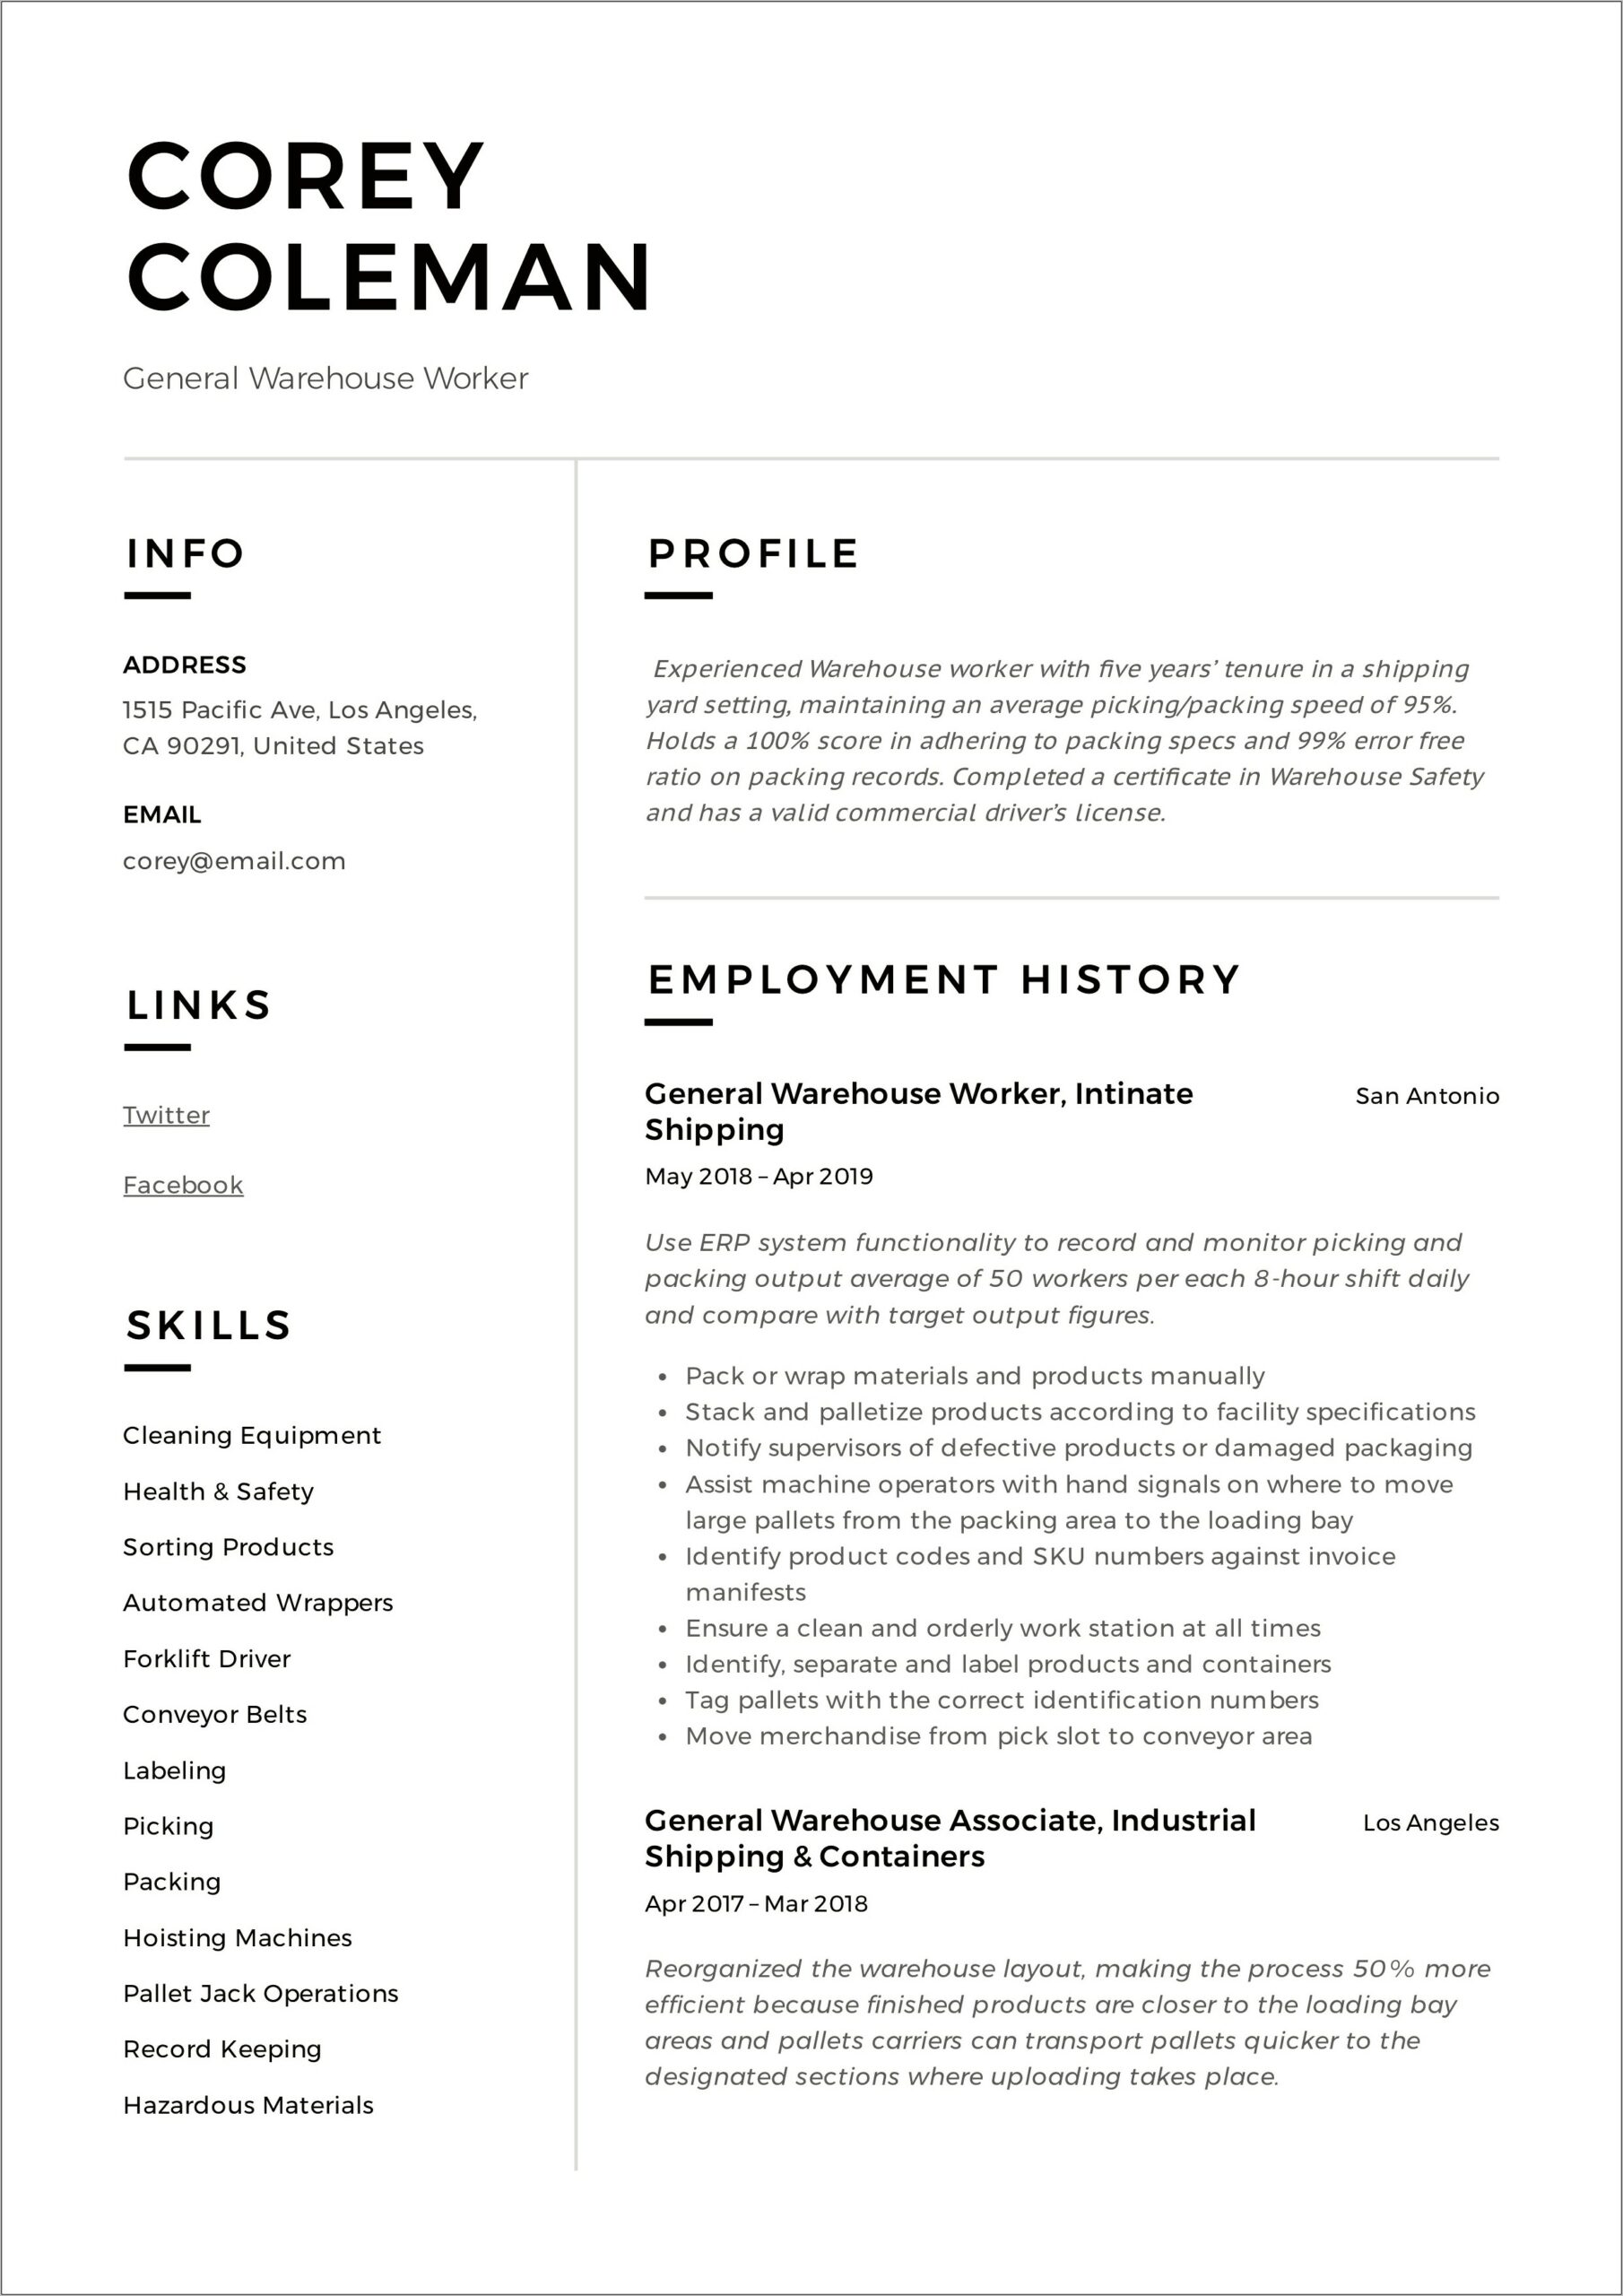 Resume Objective Statements For A Warehouse Job